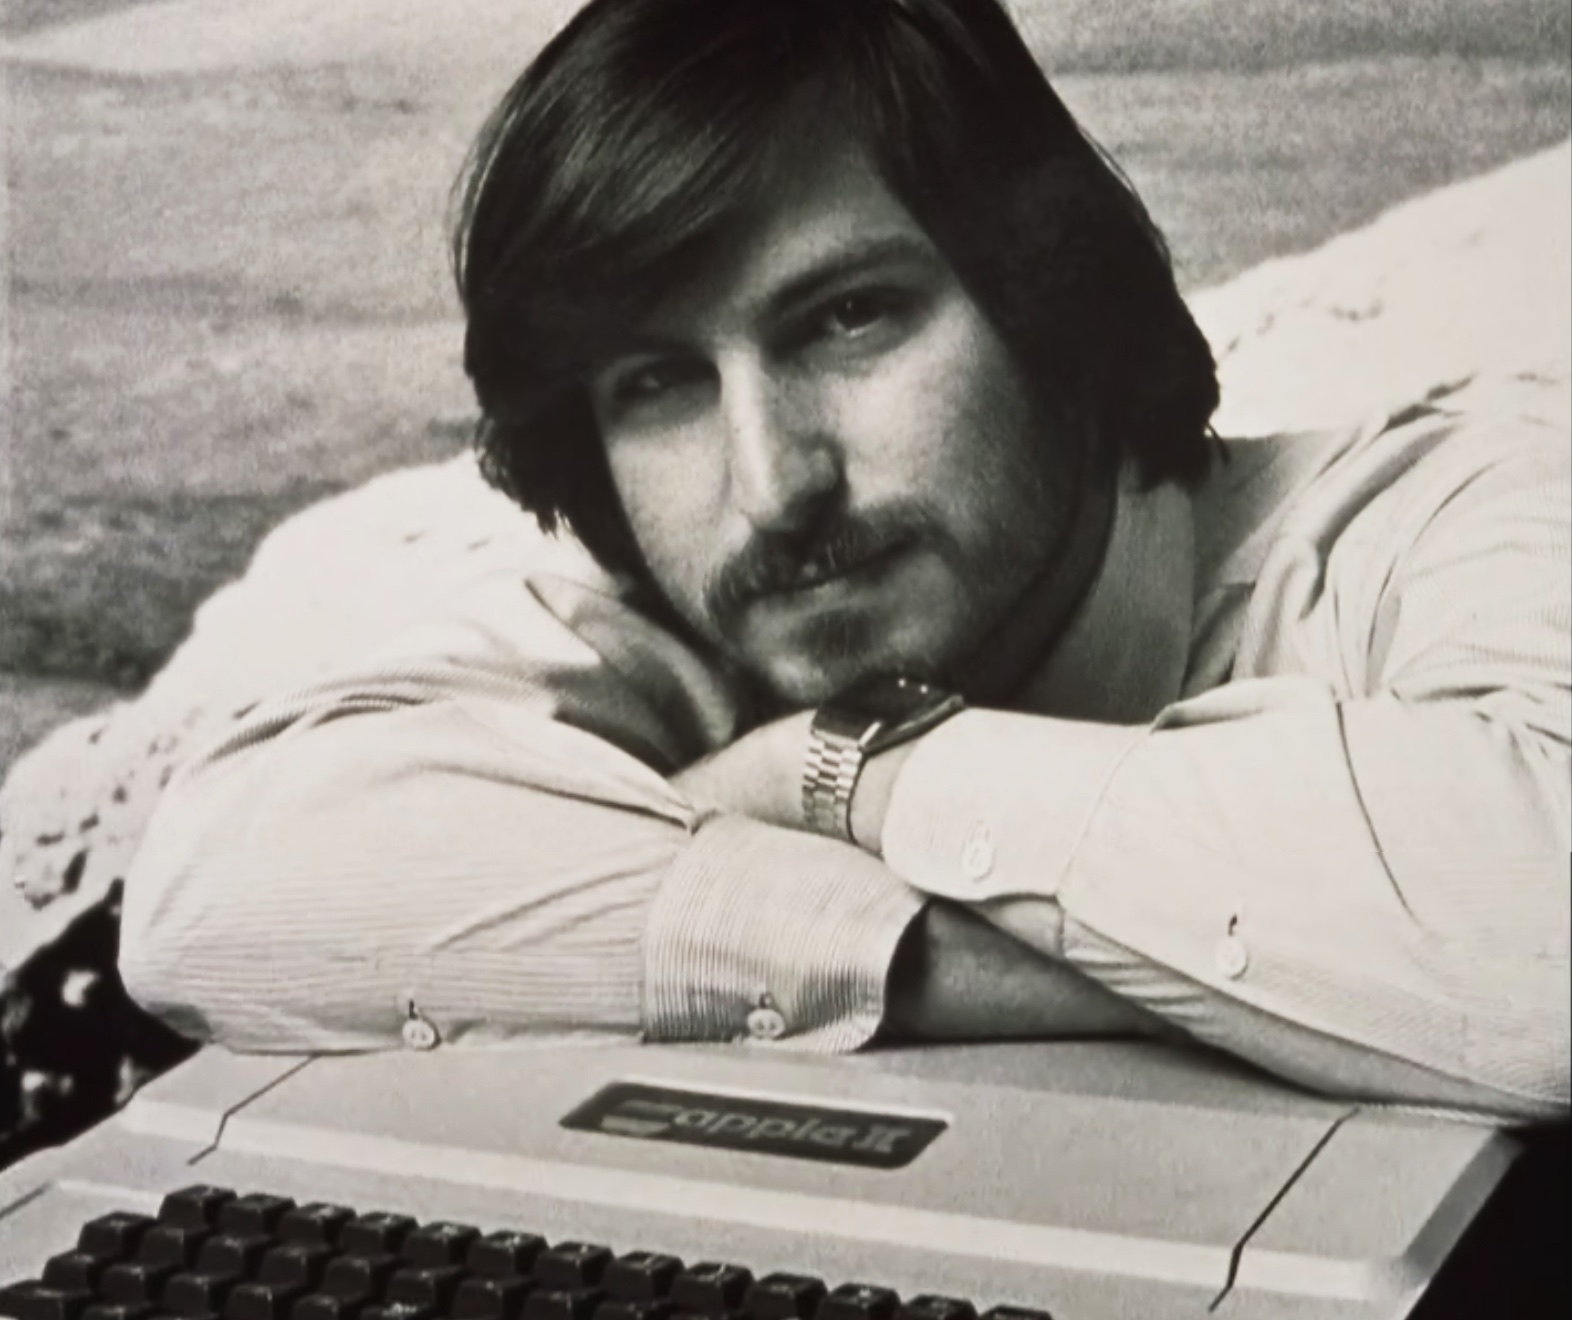 Jobs posing with Apple II for an advertisement, 1980